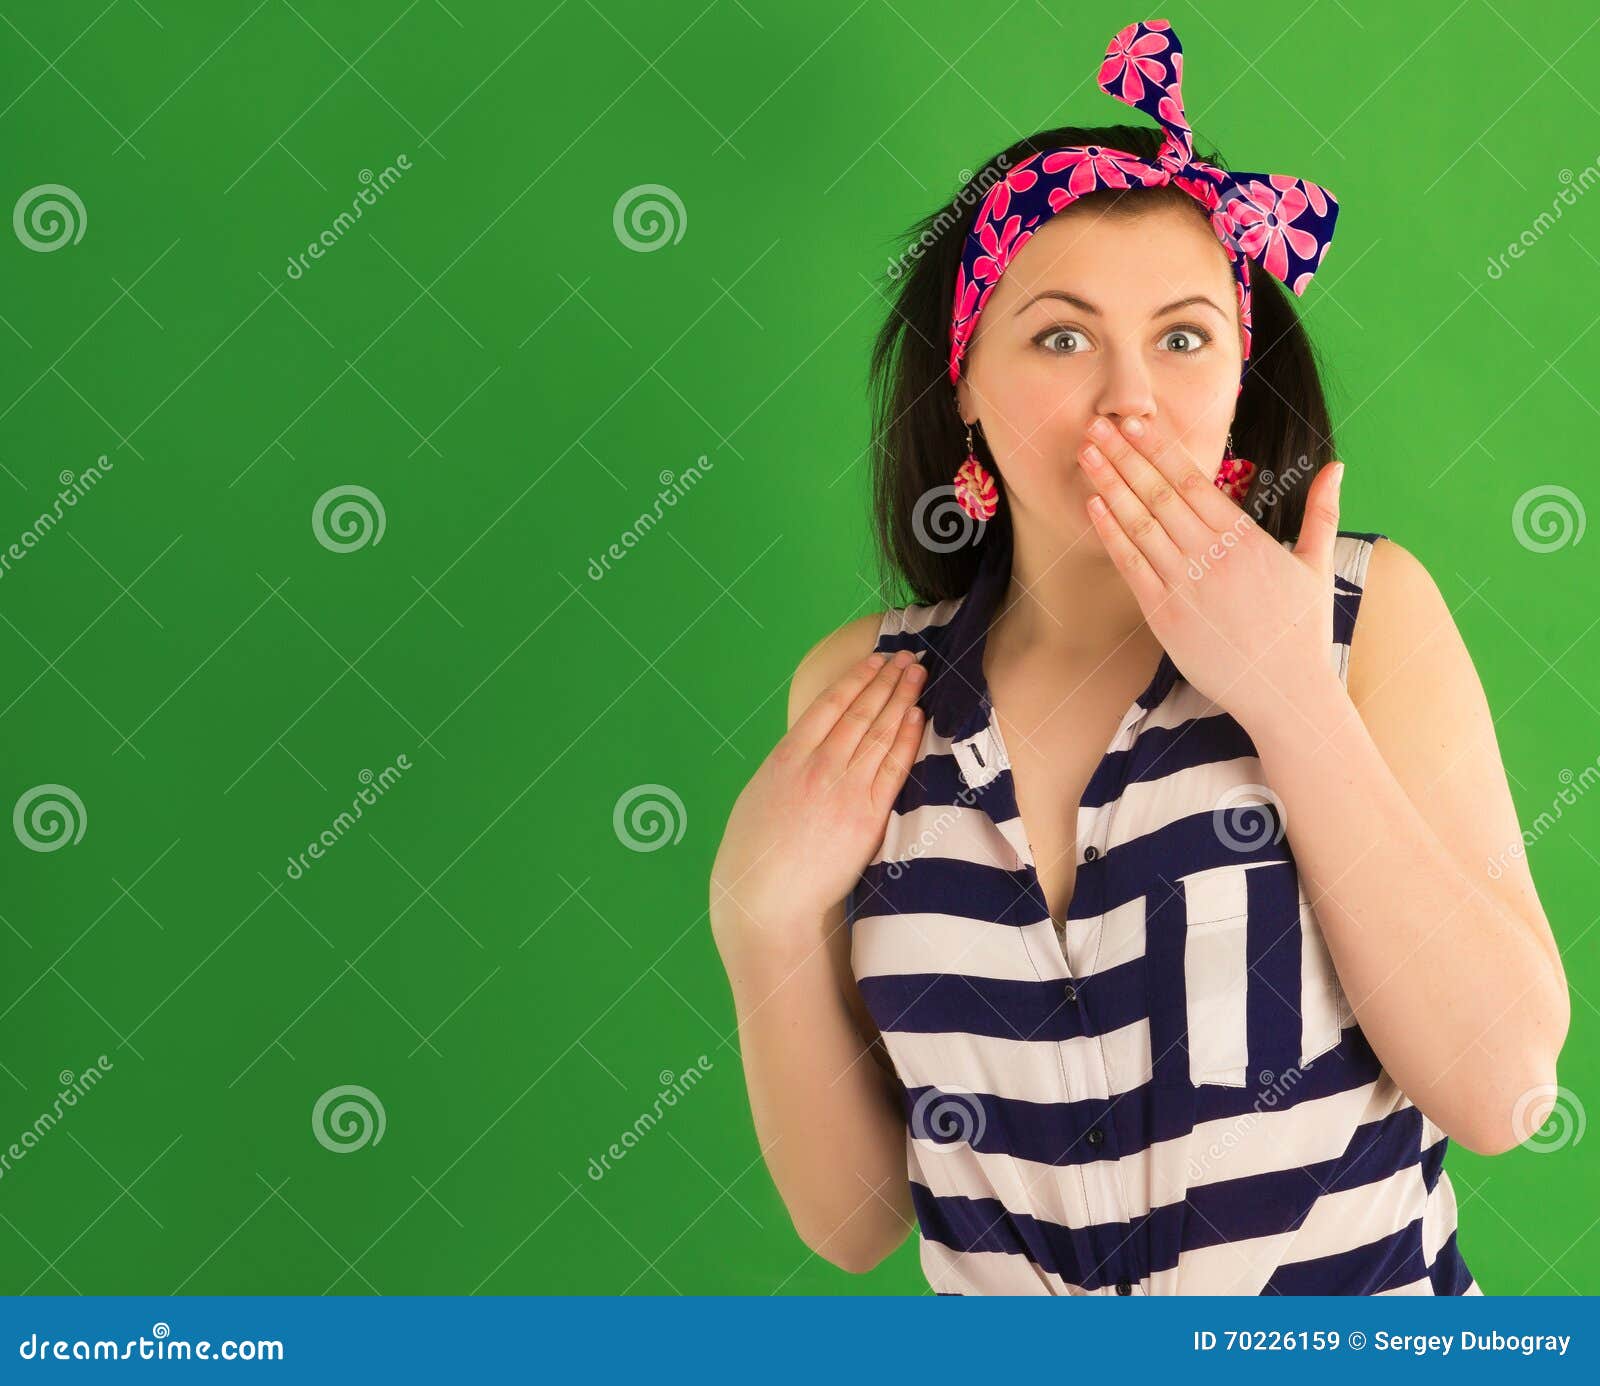 Surprised Pin Up Girl With Glasses Stock Image Image Of Happiness